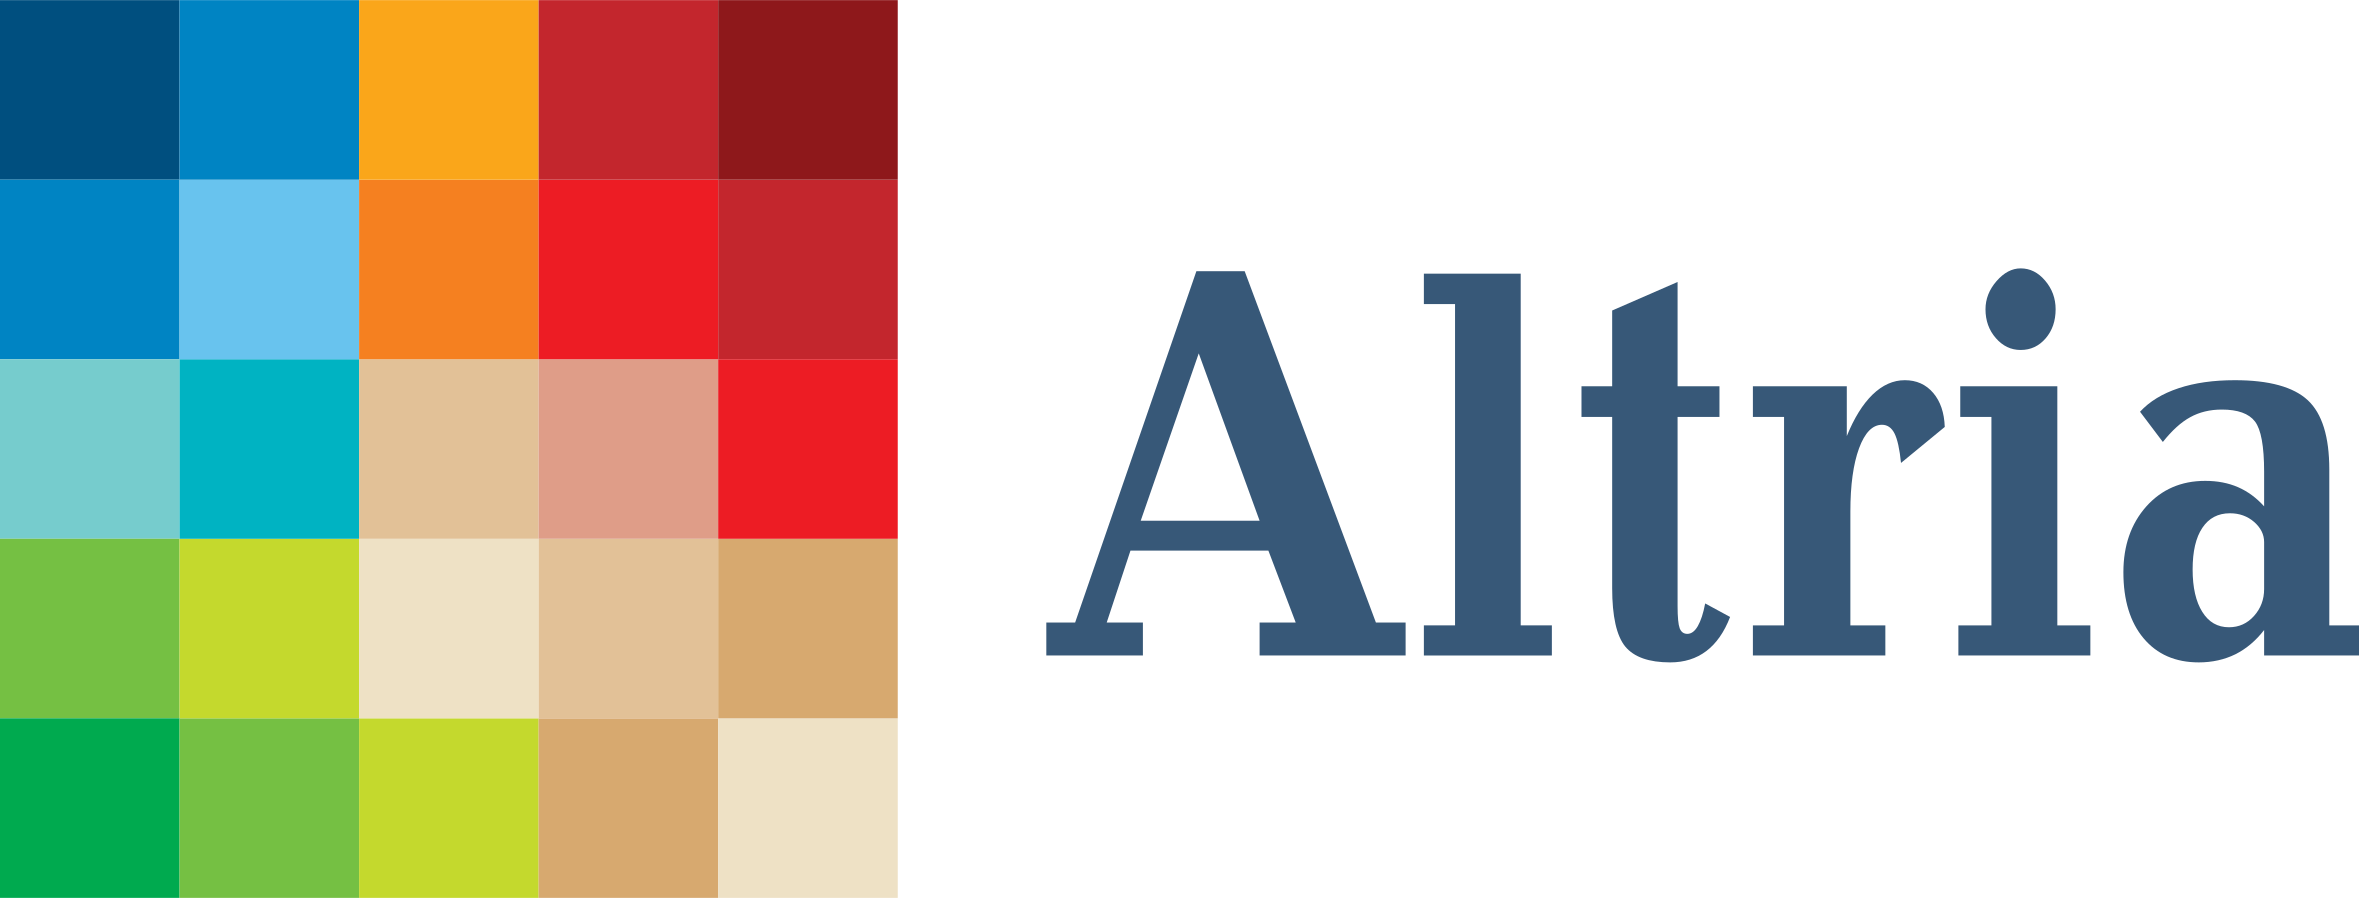 Altria Group Logo PNG-Datei